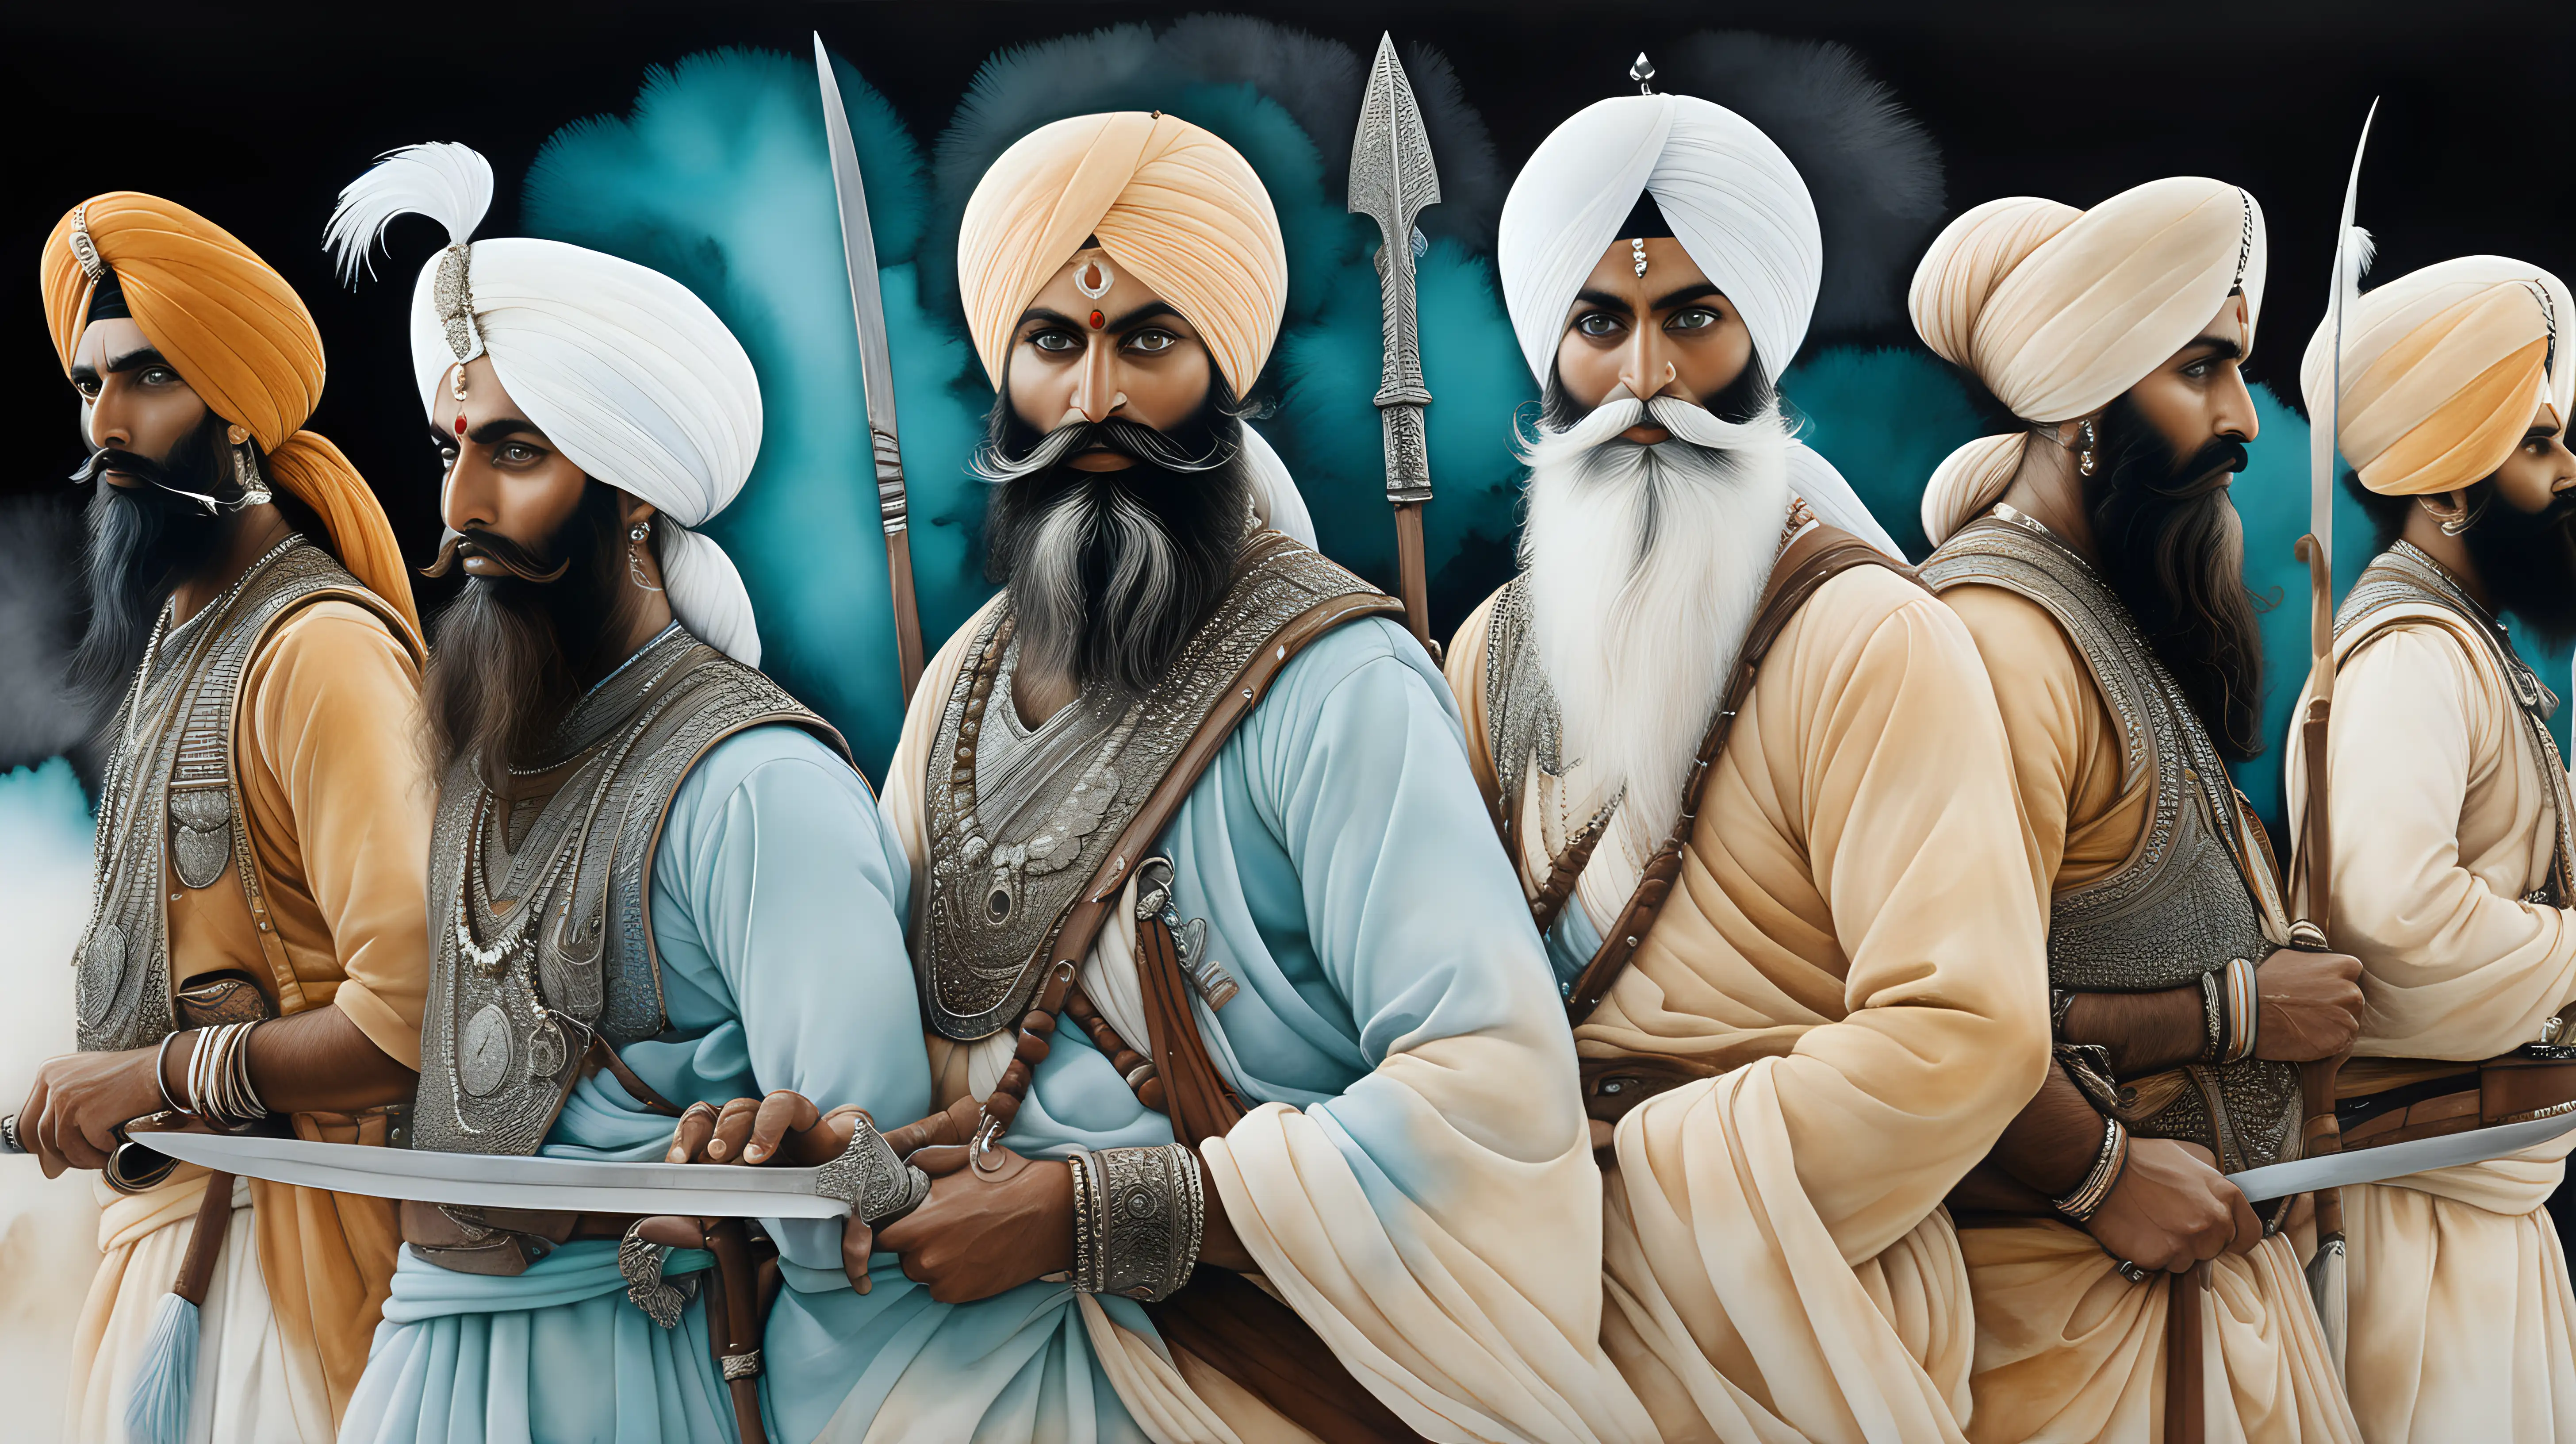 Sikh Warriors in Vibrant Watercolor Landscape